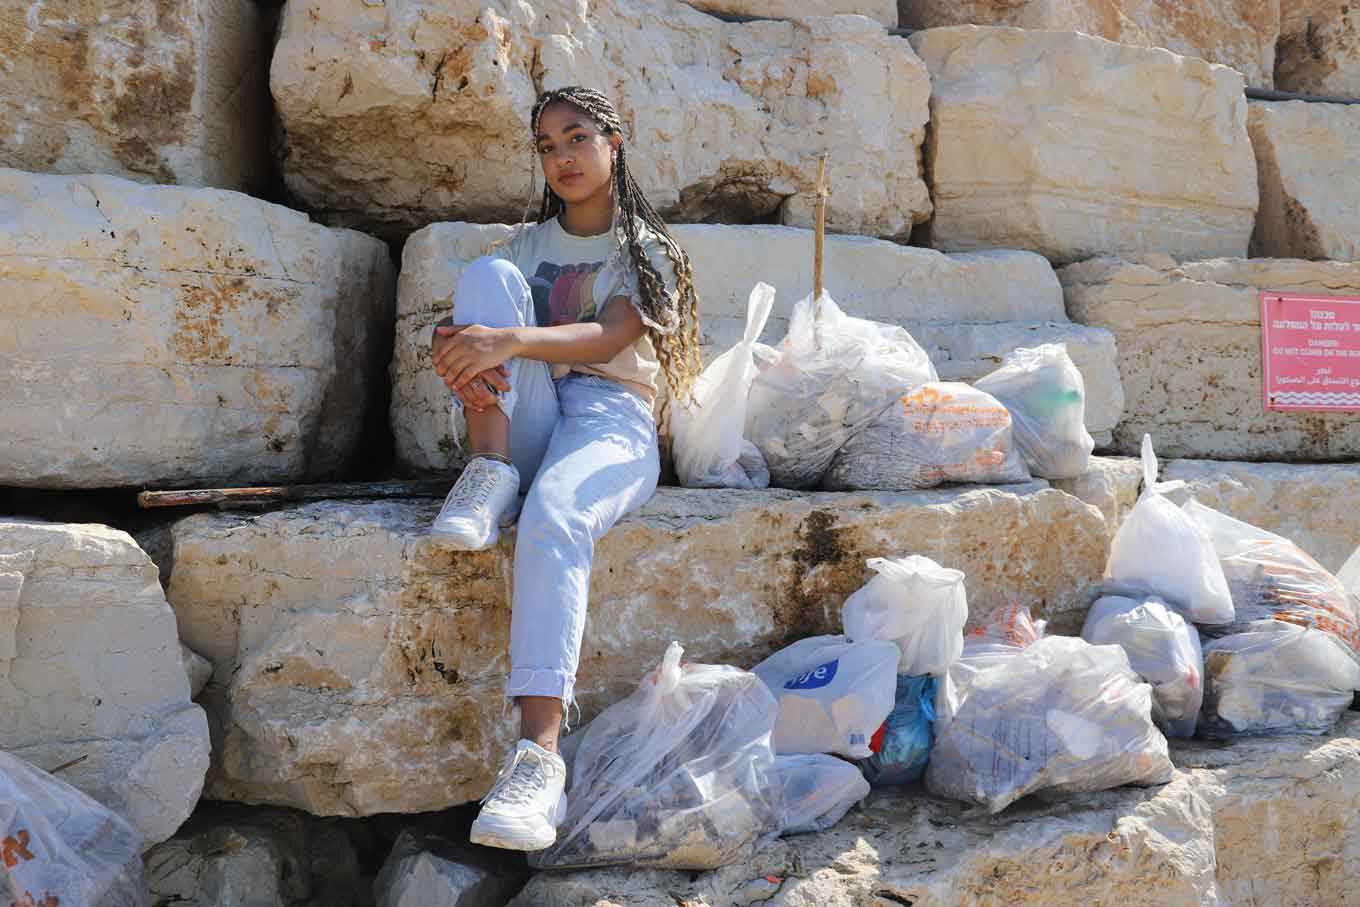 Sharona Shnayder sits on rocks, surrounded by bags of trash.